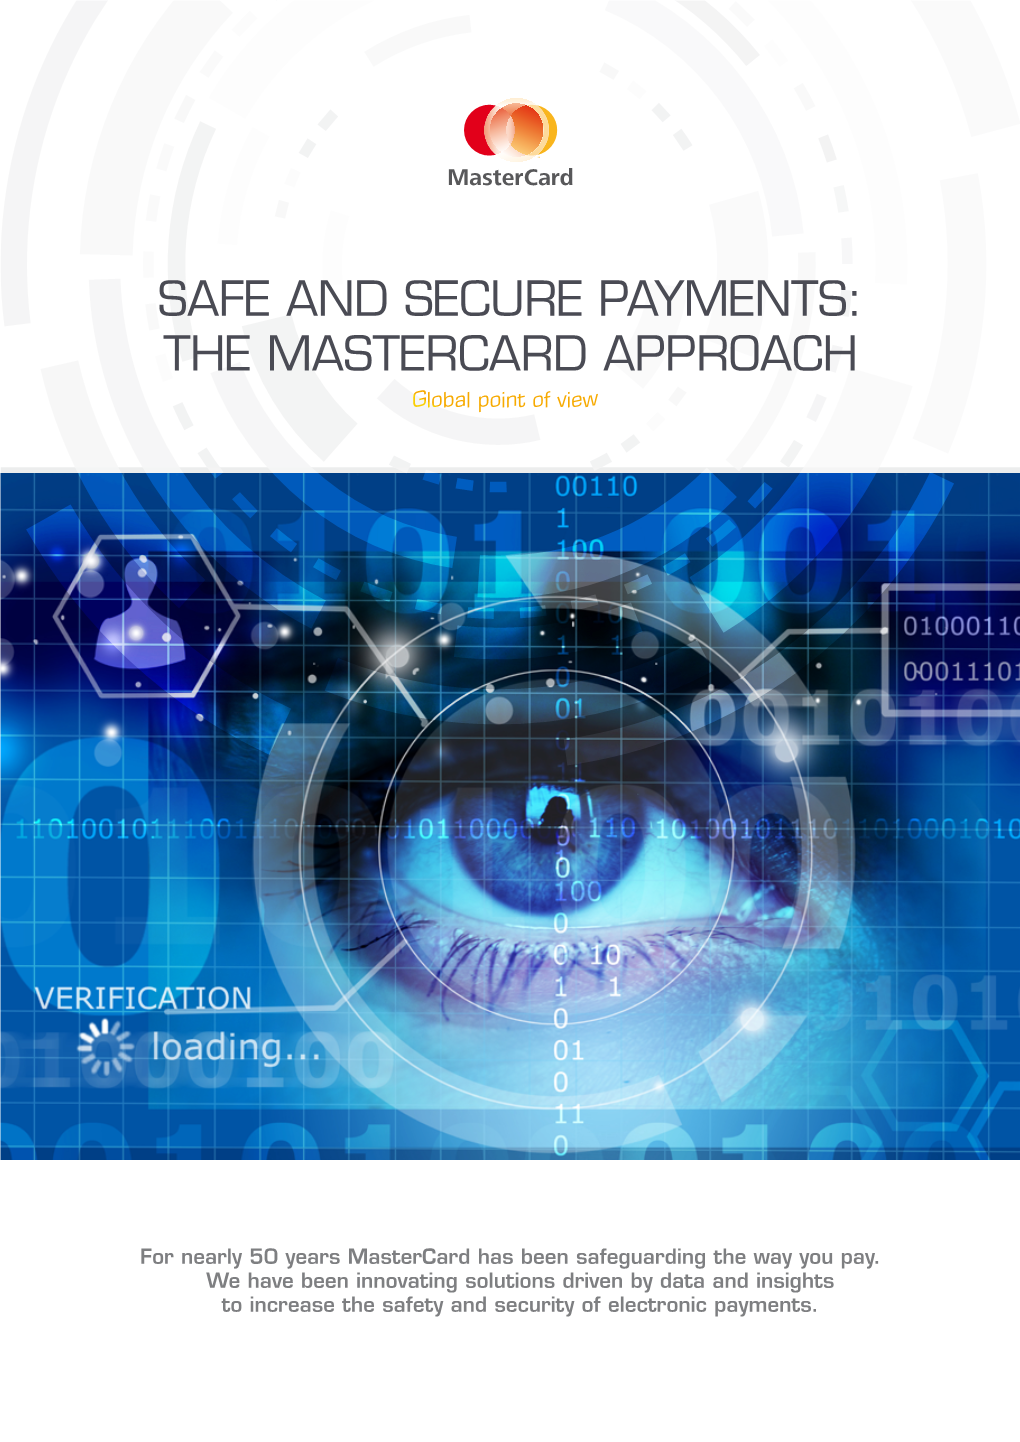 SAFE and SECURE PAYMENTS: the MASTERCARD APPROACH Global Point of View